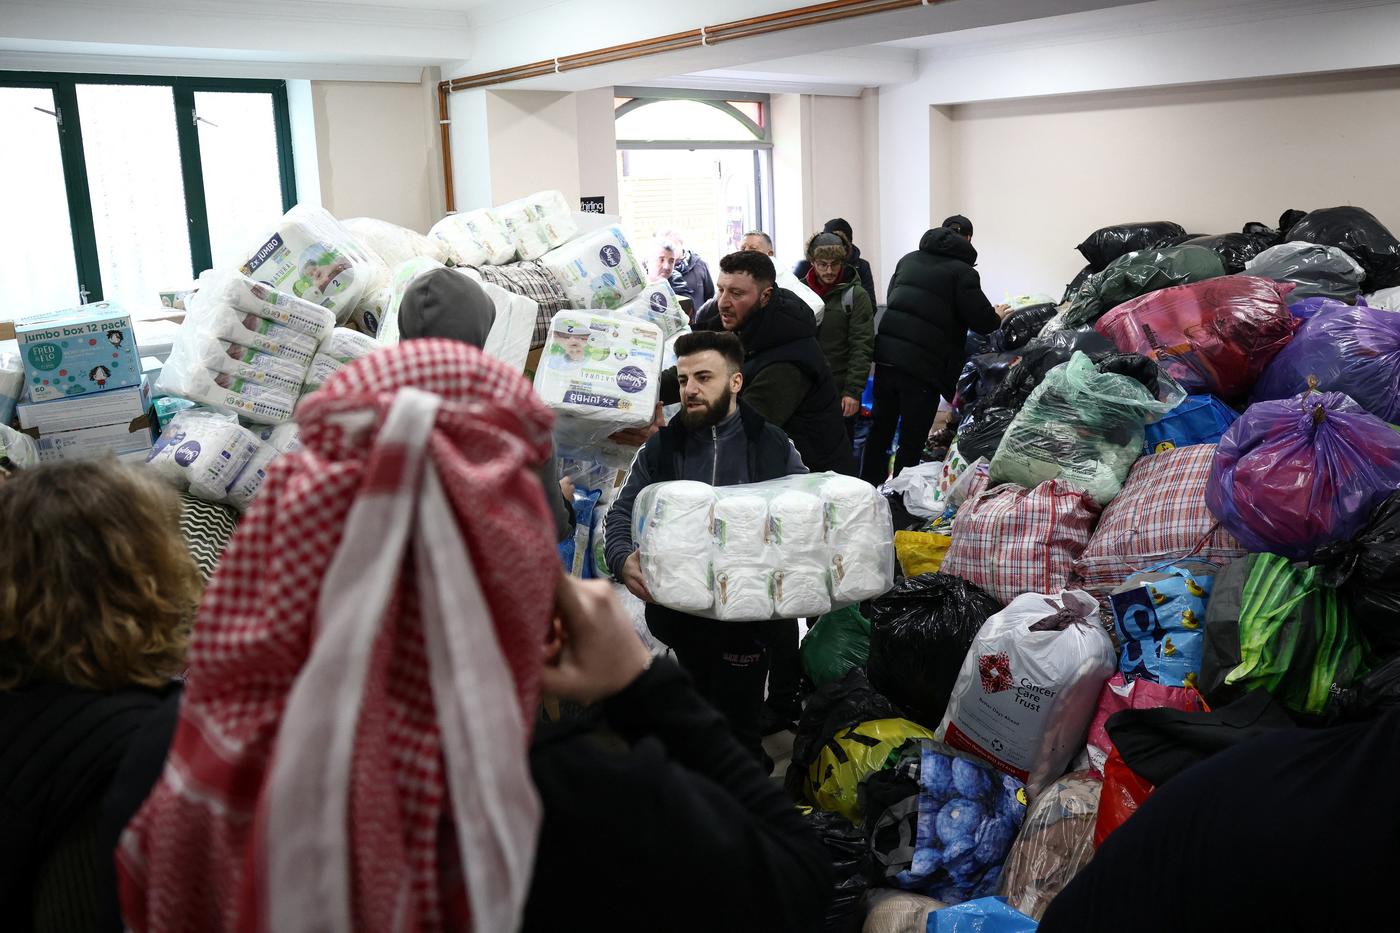 Members of the Turkish community sort donations at the Aziziye Mosque, north London as they prepare to send aid to Turkey to support victims of the earthquake (Reuters)